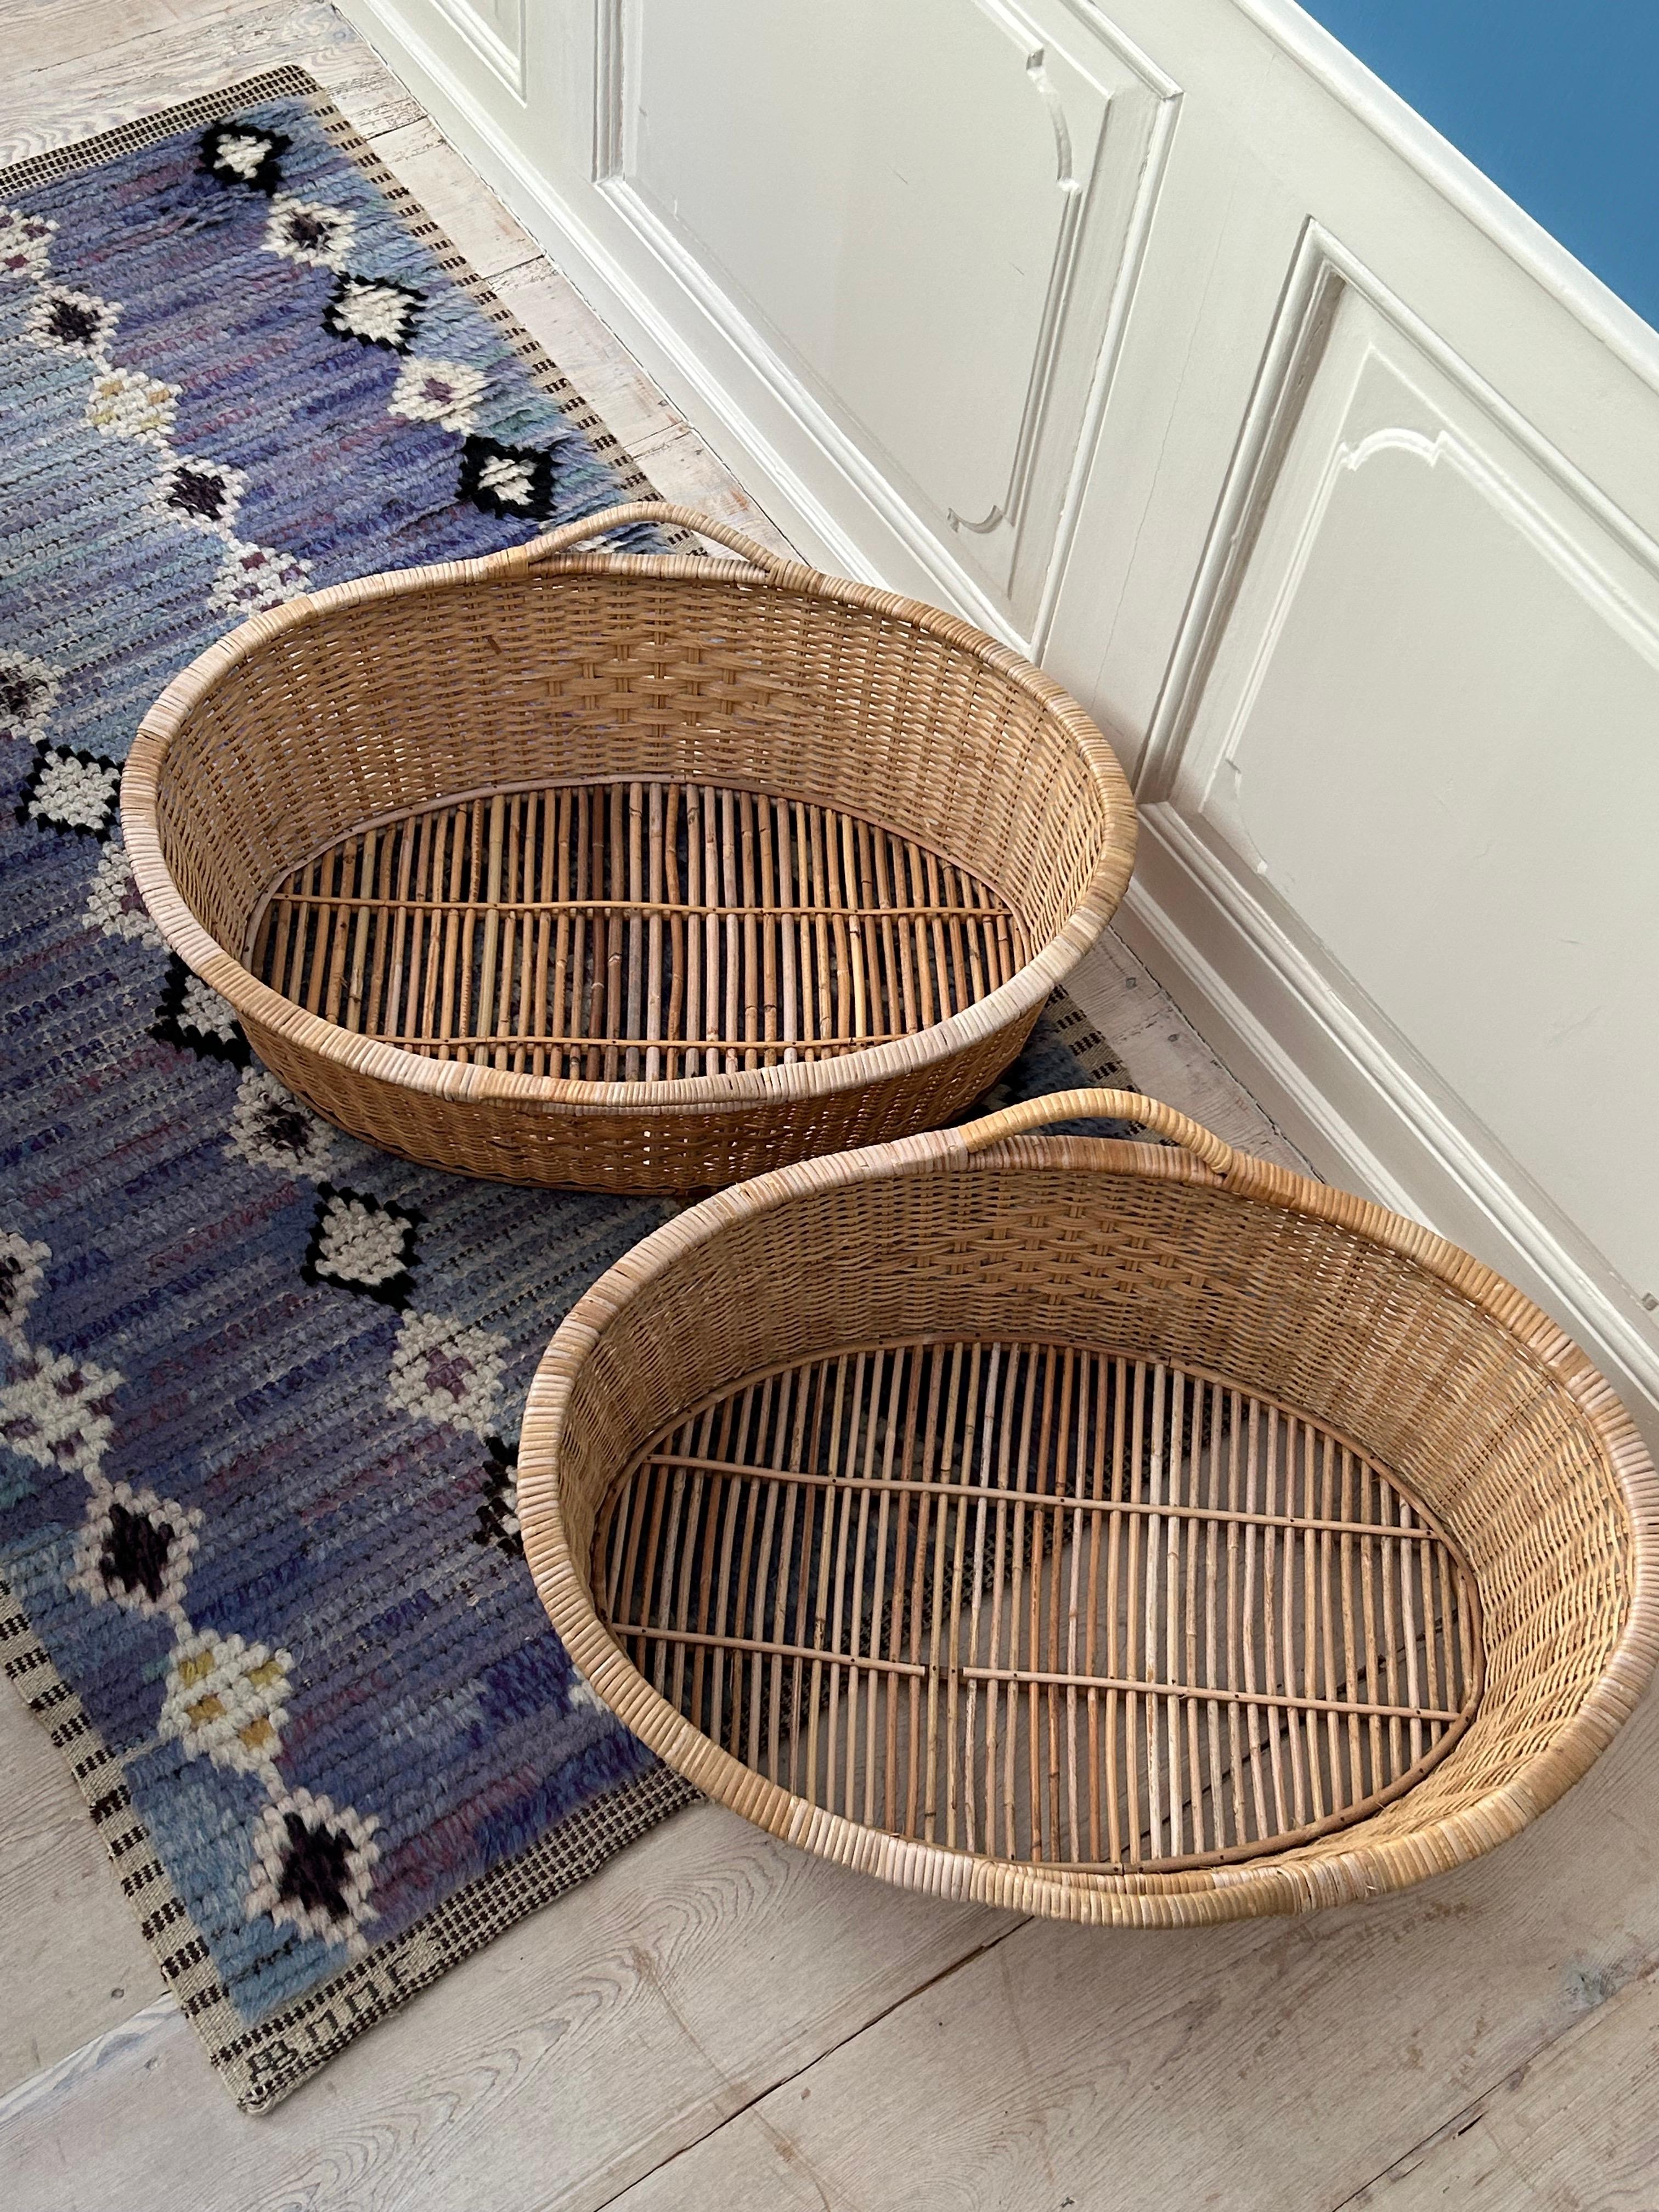 Vintage Oval Rattan Basket with Handles, France, 20th Century For Sale 11